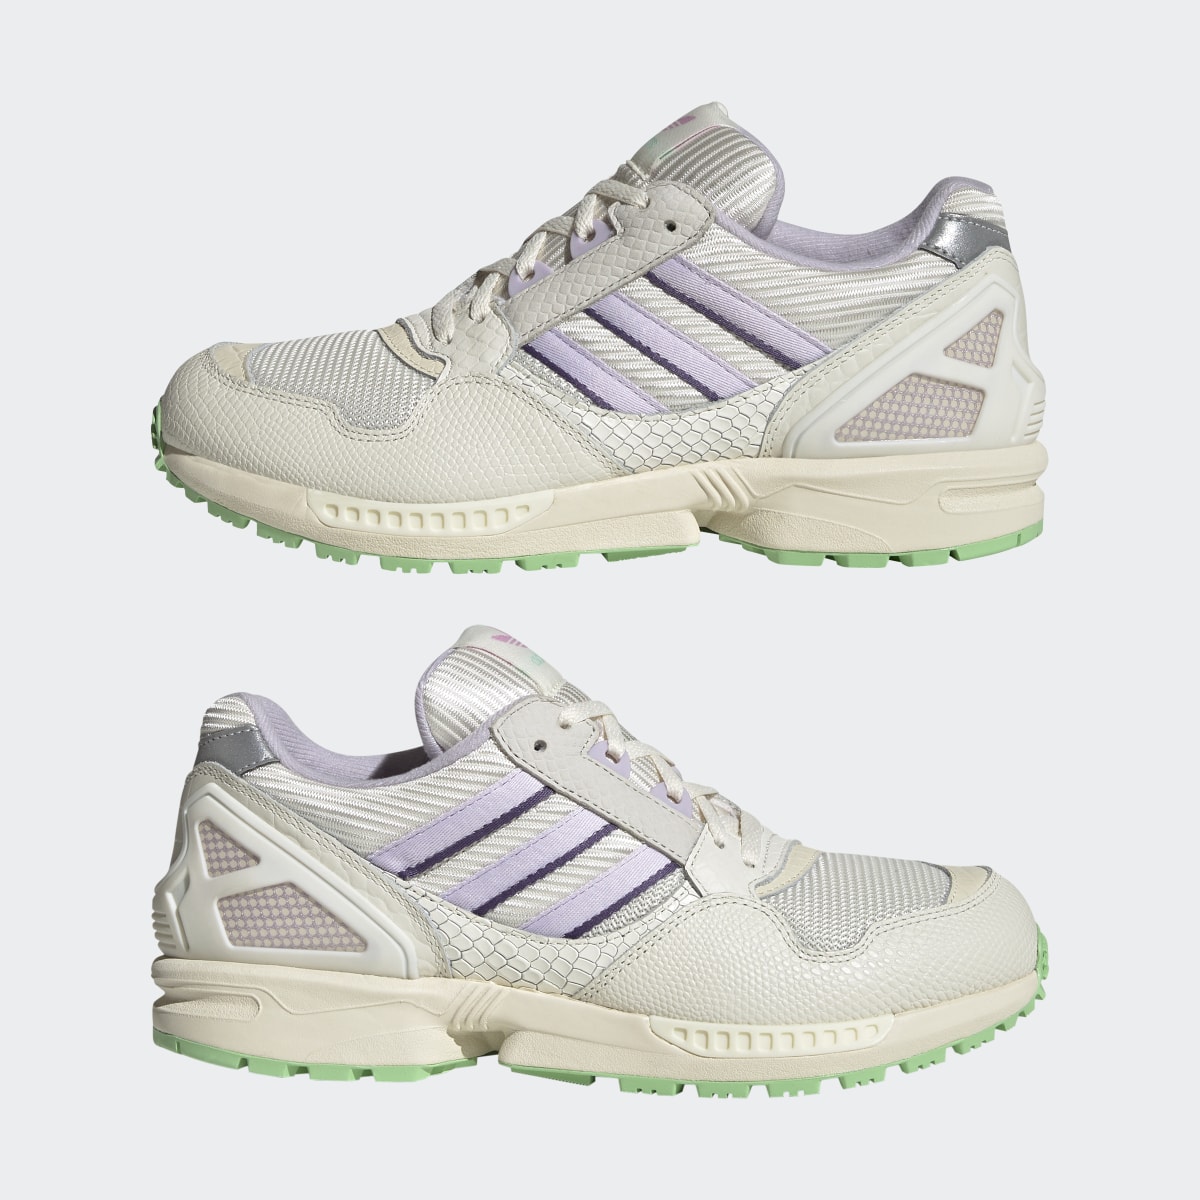 Adidas ZX 9020 Shoes. 8